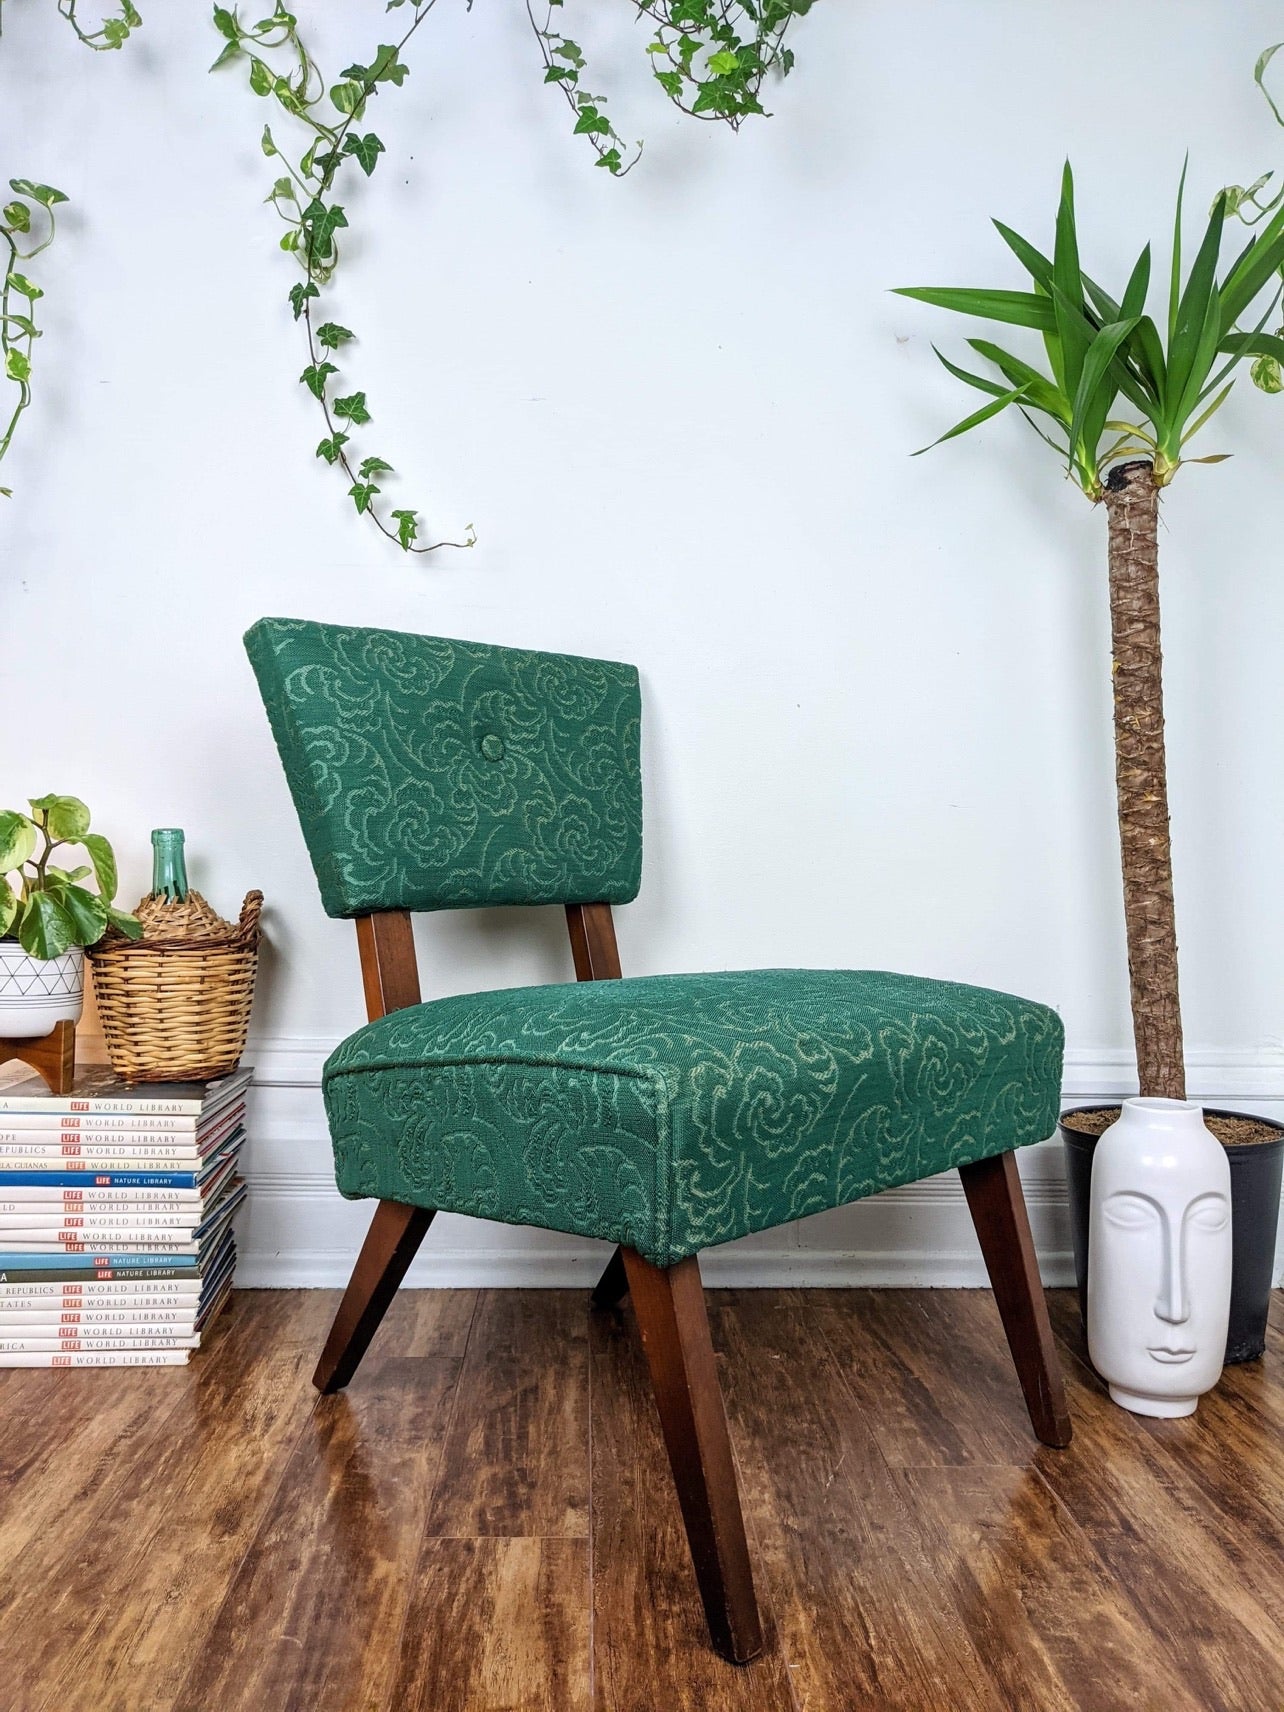 The Emerald Green Chair